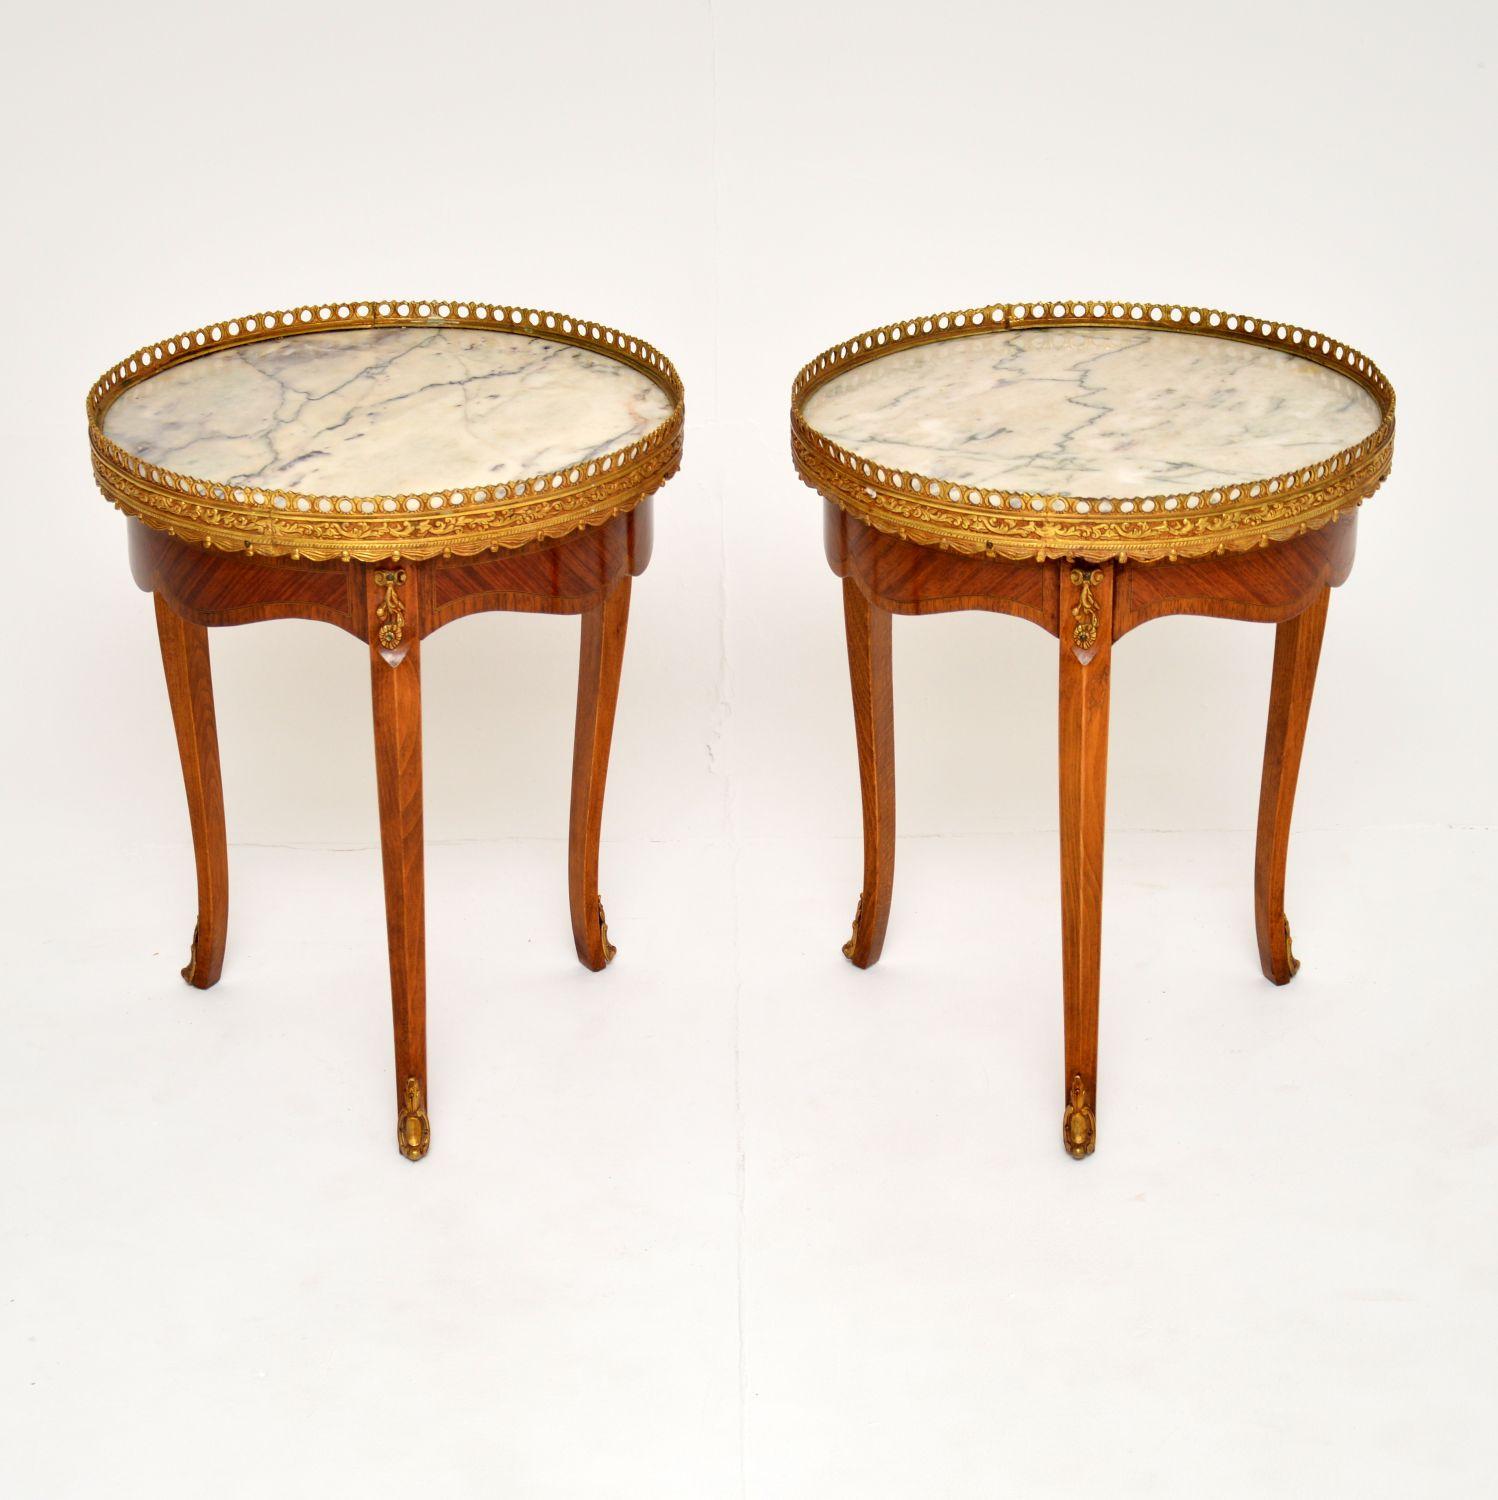 A beautiful and elegant pair of antique French side tables with marble tops, dating from around the 1920-1930’s.

They are a lovely size, perfect for use as end tables either side of a sofa or even as low bedside tables. The marble tops have